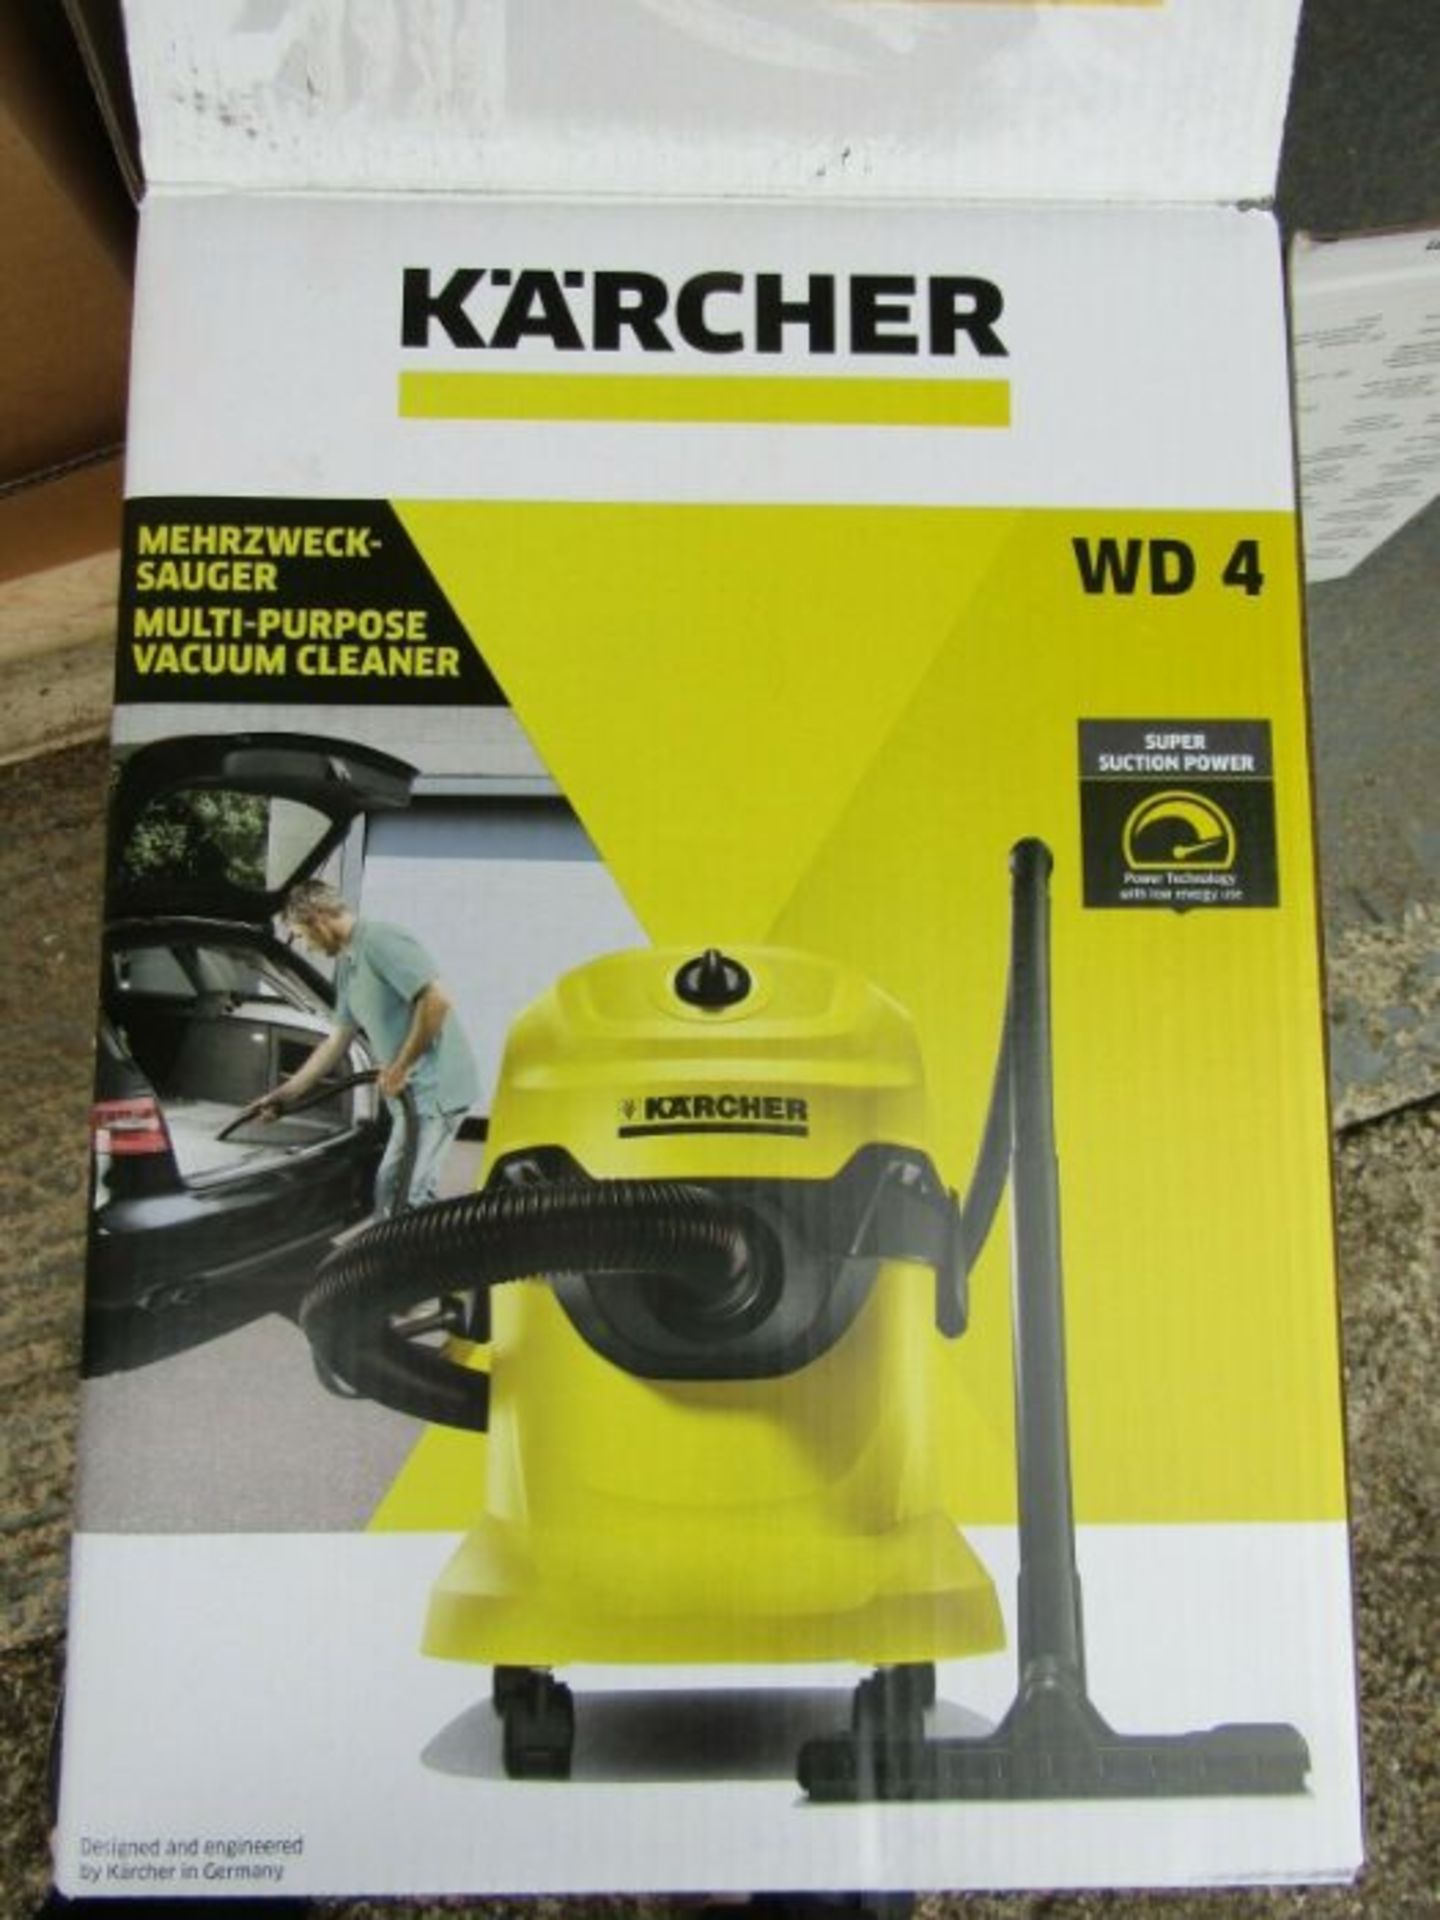 NEW Karcher WD 4 Wet and Dry Vacuum Cleaner - Yellow - UK Plug Blk 1931654 - Image 3 of 4